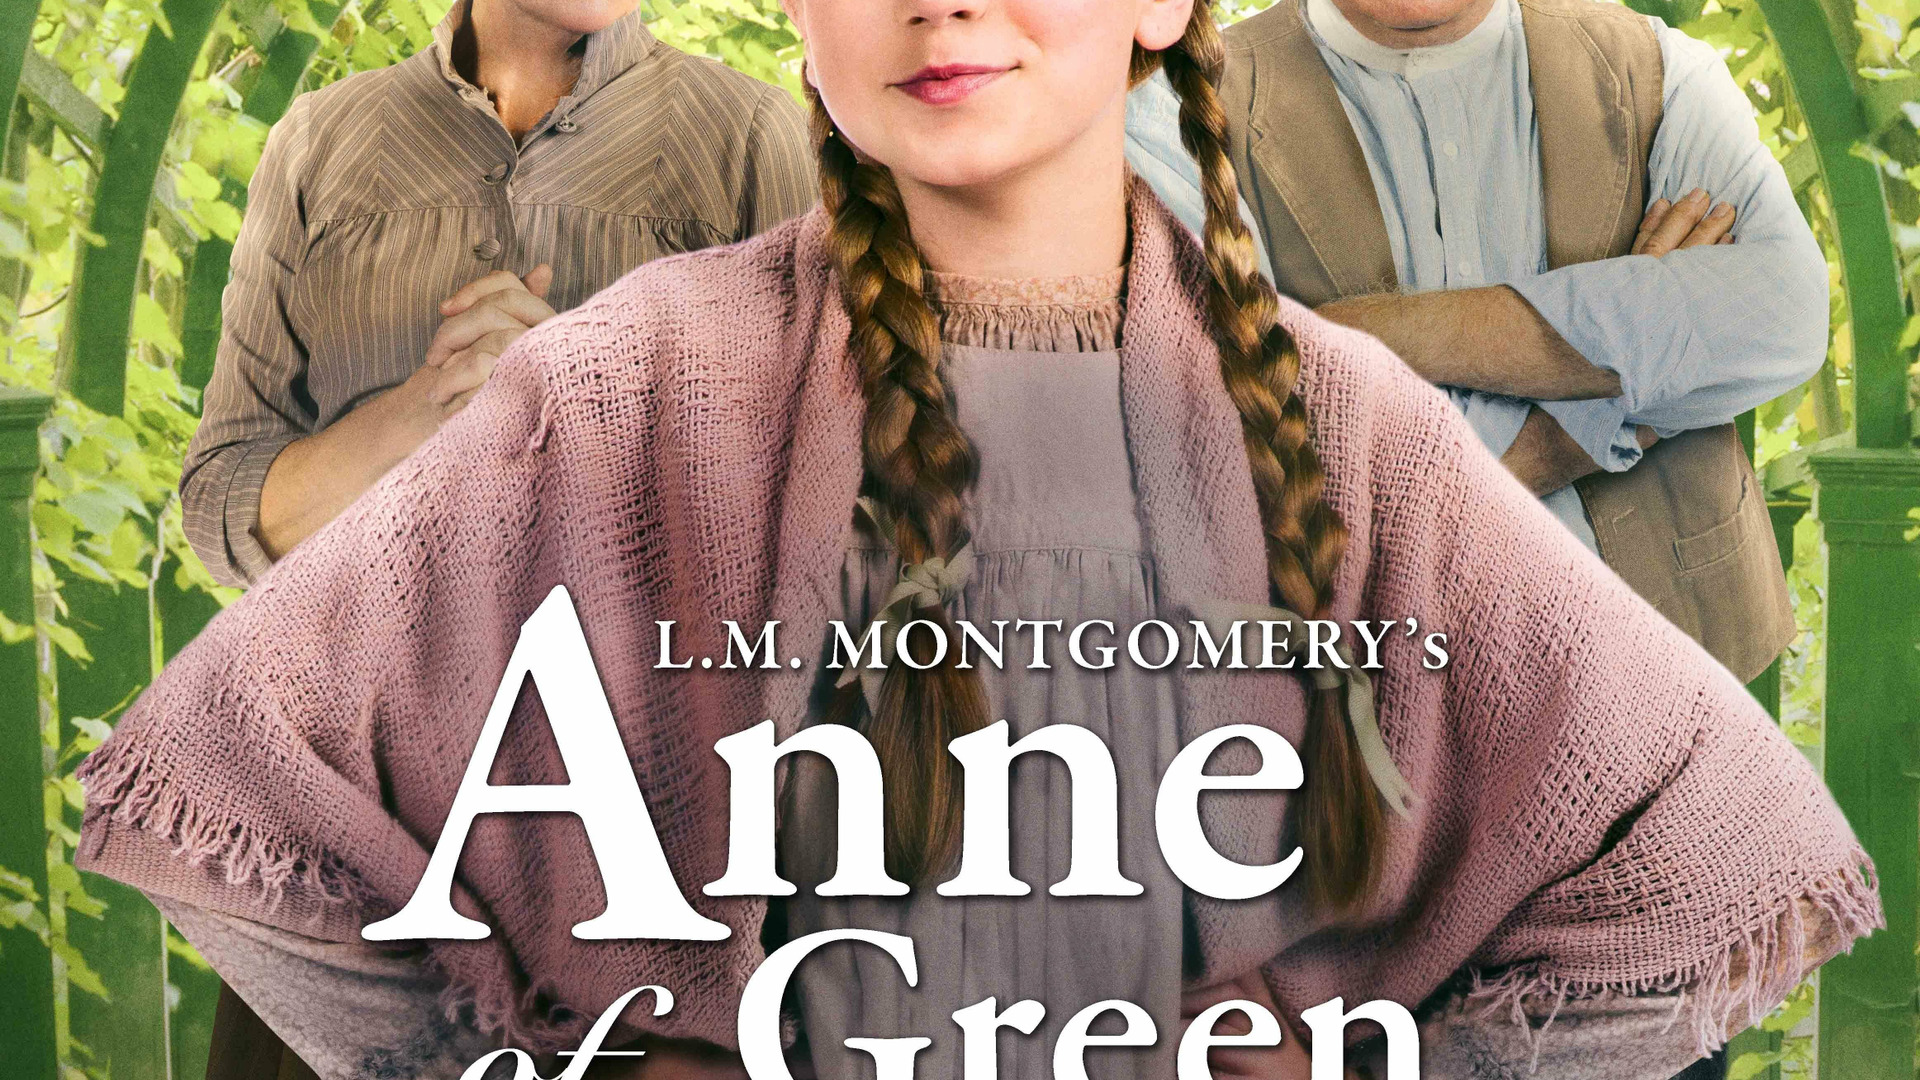 Show L.M. Montgomery's Anne of Green Gables